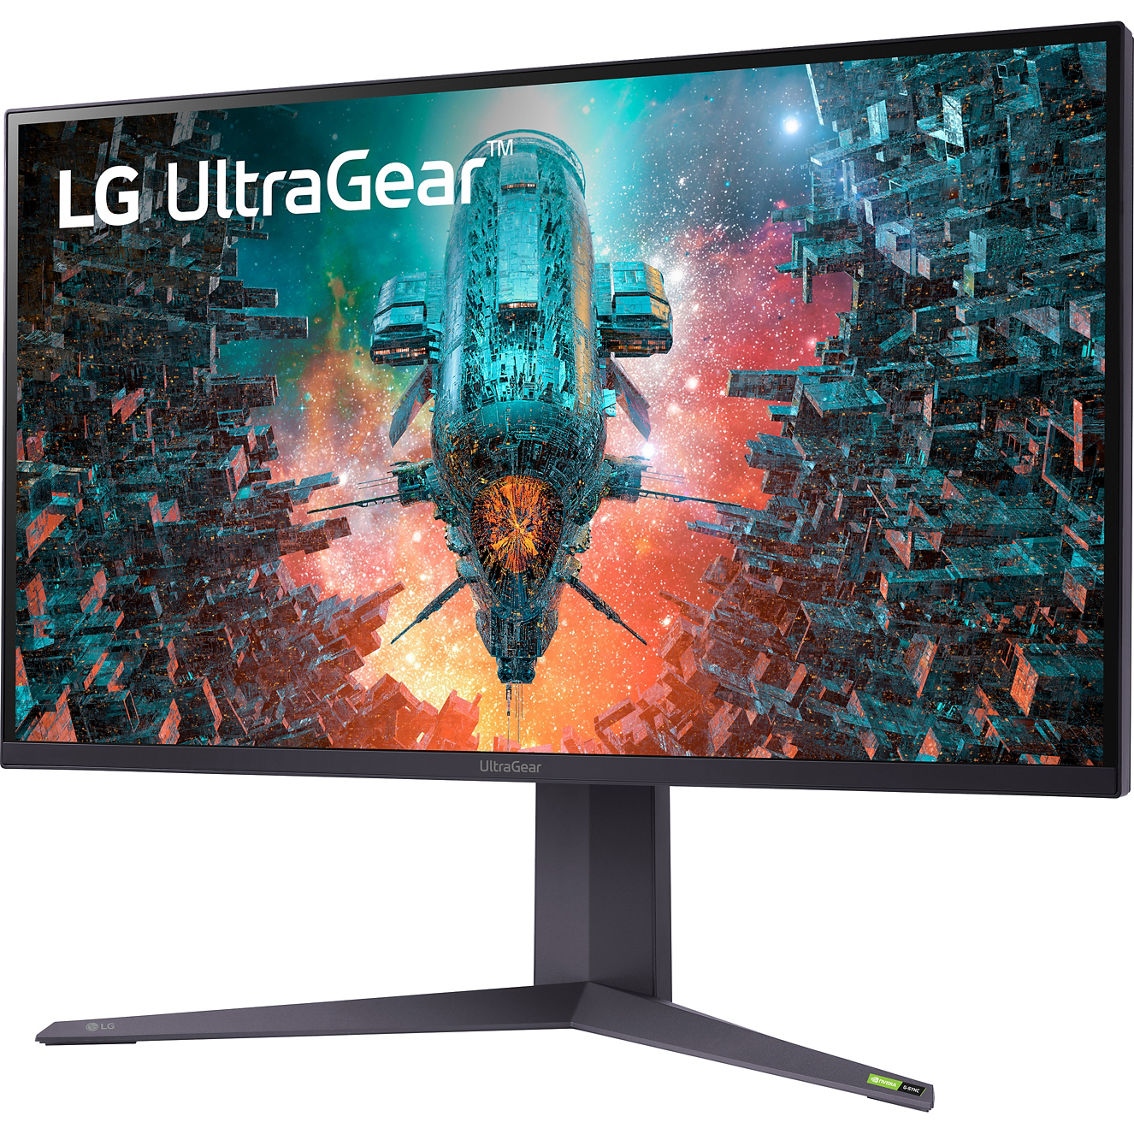 LG 4K UHD Nano IPS 144Hz HDR1000 Gaming Monitor with G-Sync Compatibility 32 in. - Image 6 of 9